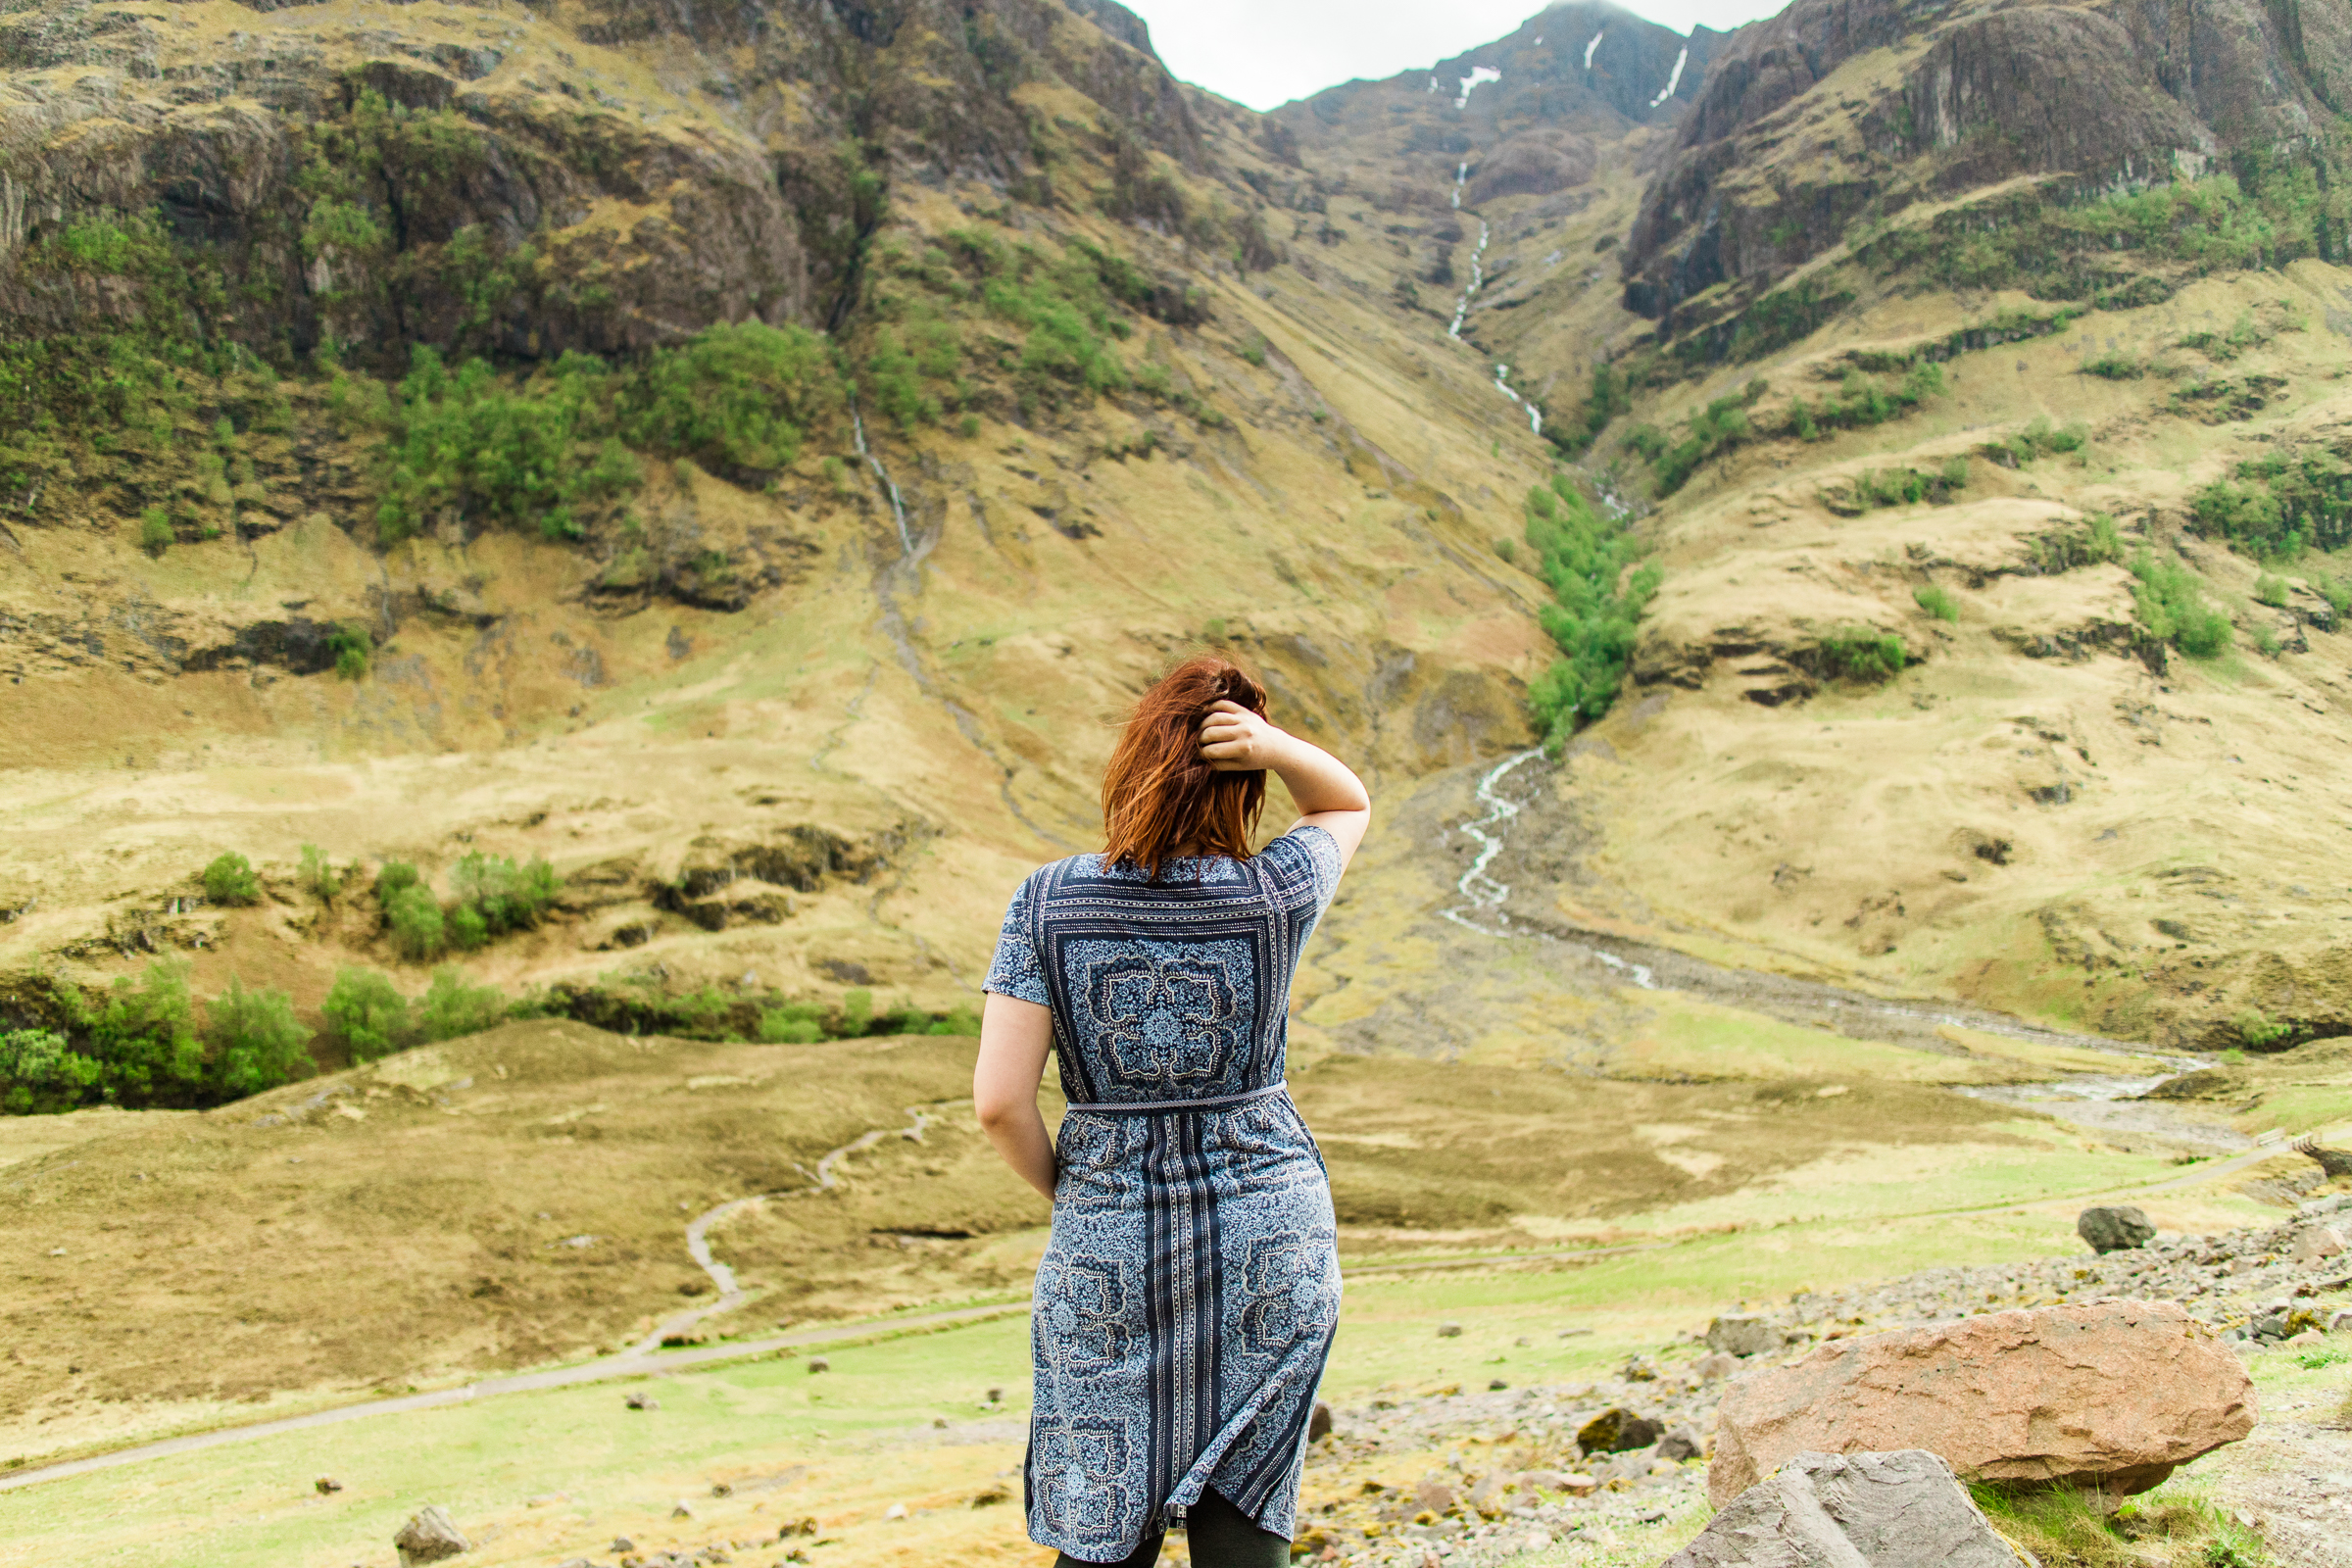  And now here we are at this infamous photo ;) The one I've plastered everywhere because it was the most magical moment of my life. Glen Coe, Scottish Highlands. 